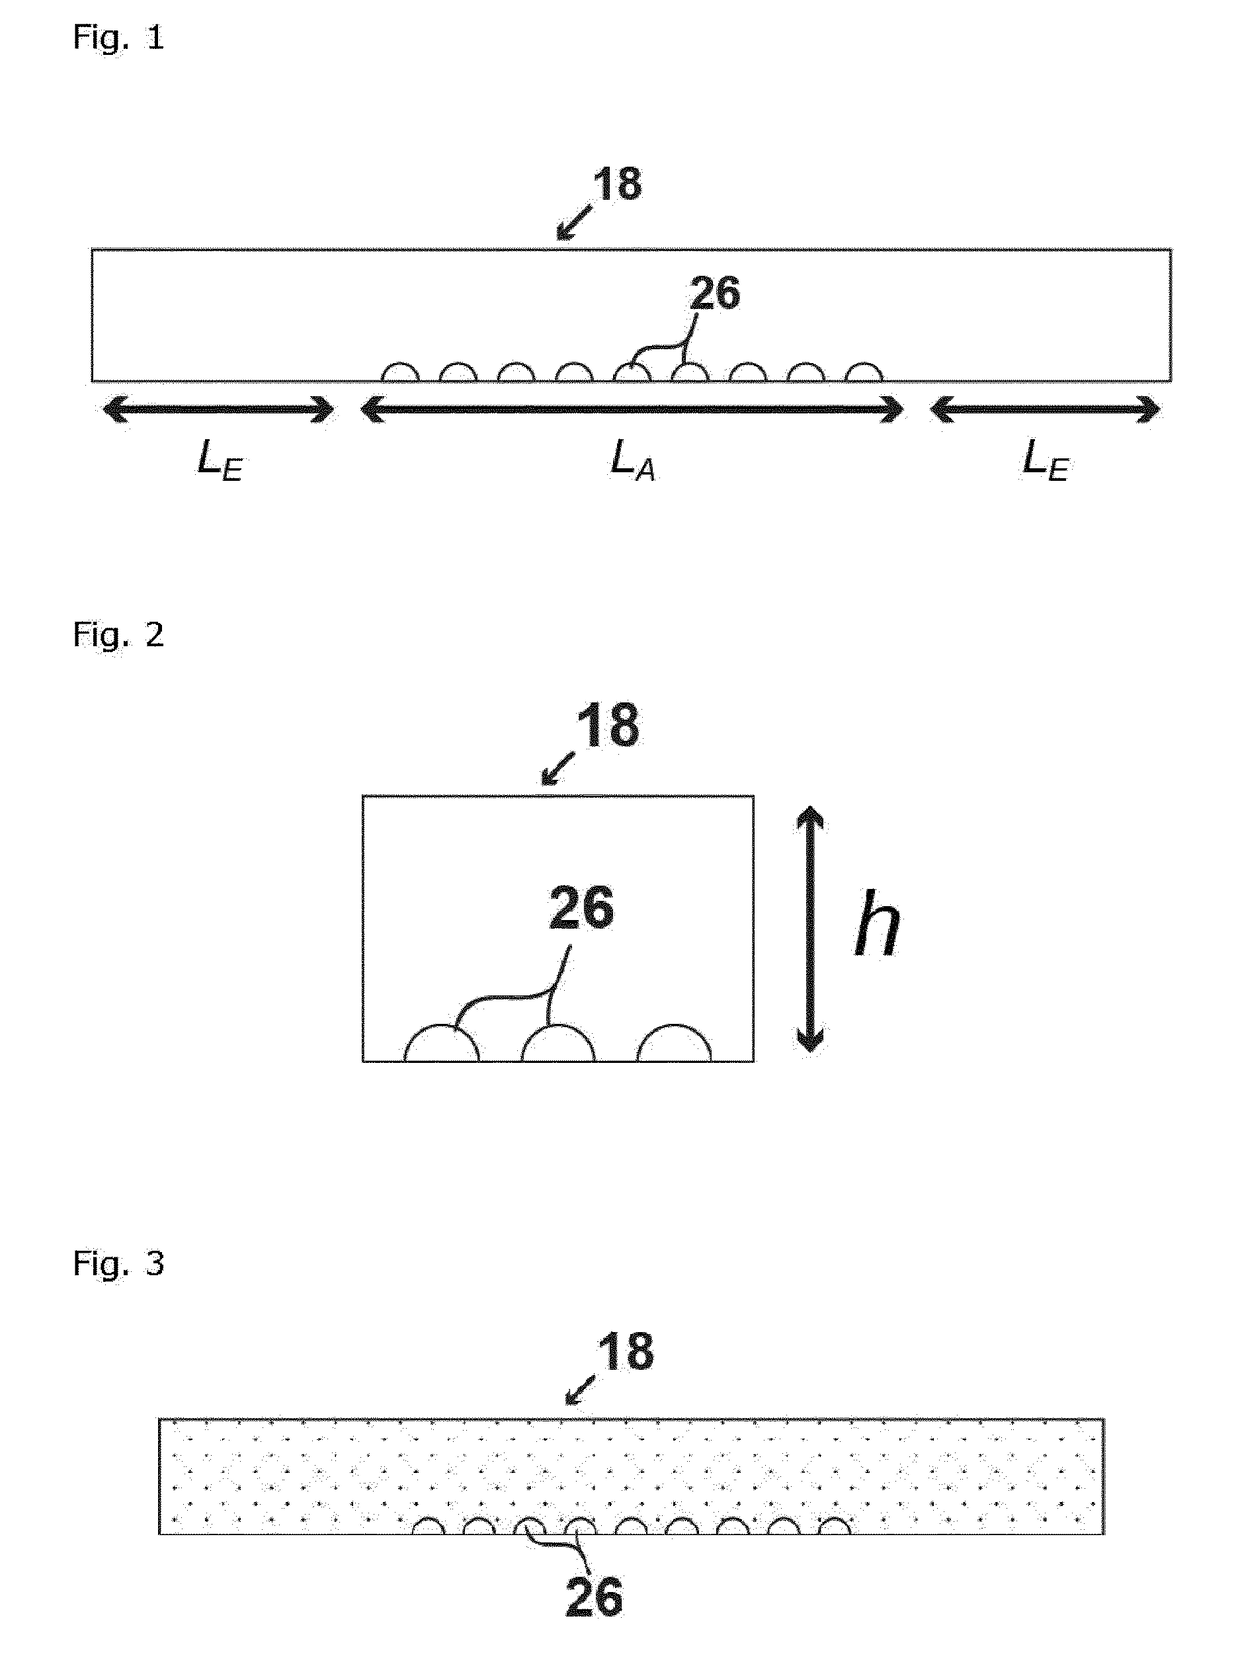 Flow system and methods for digital counting